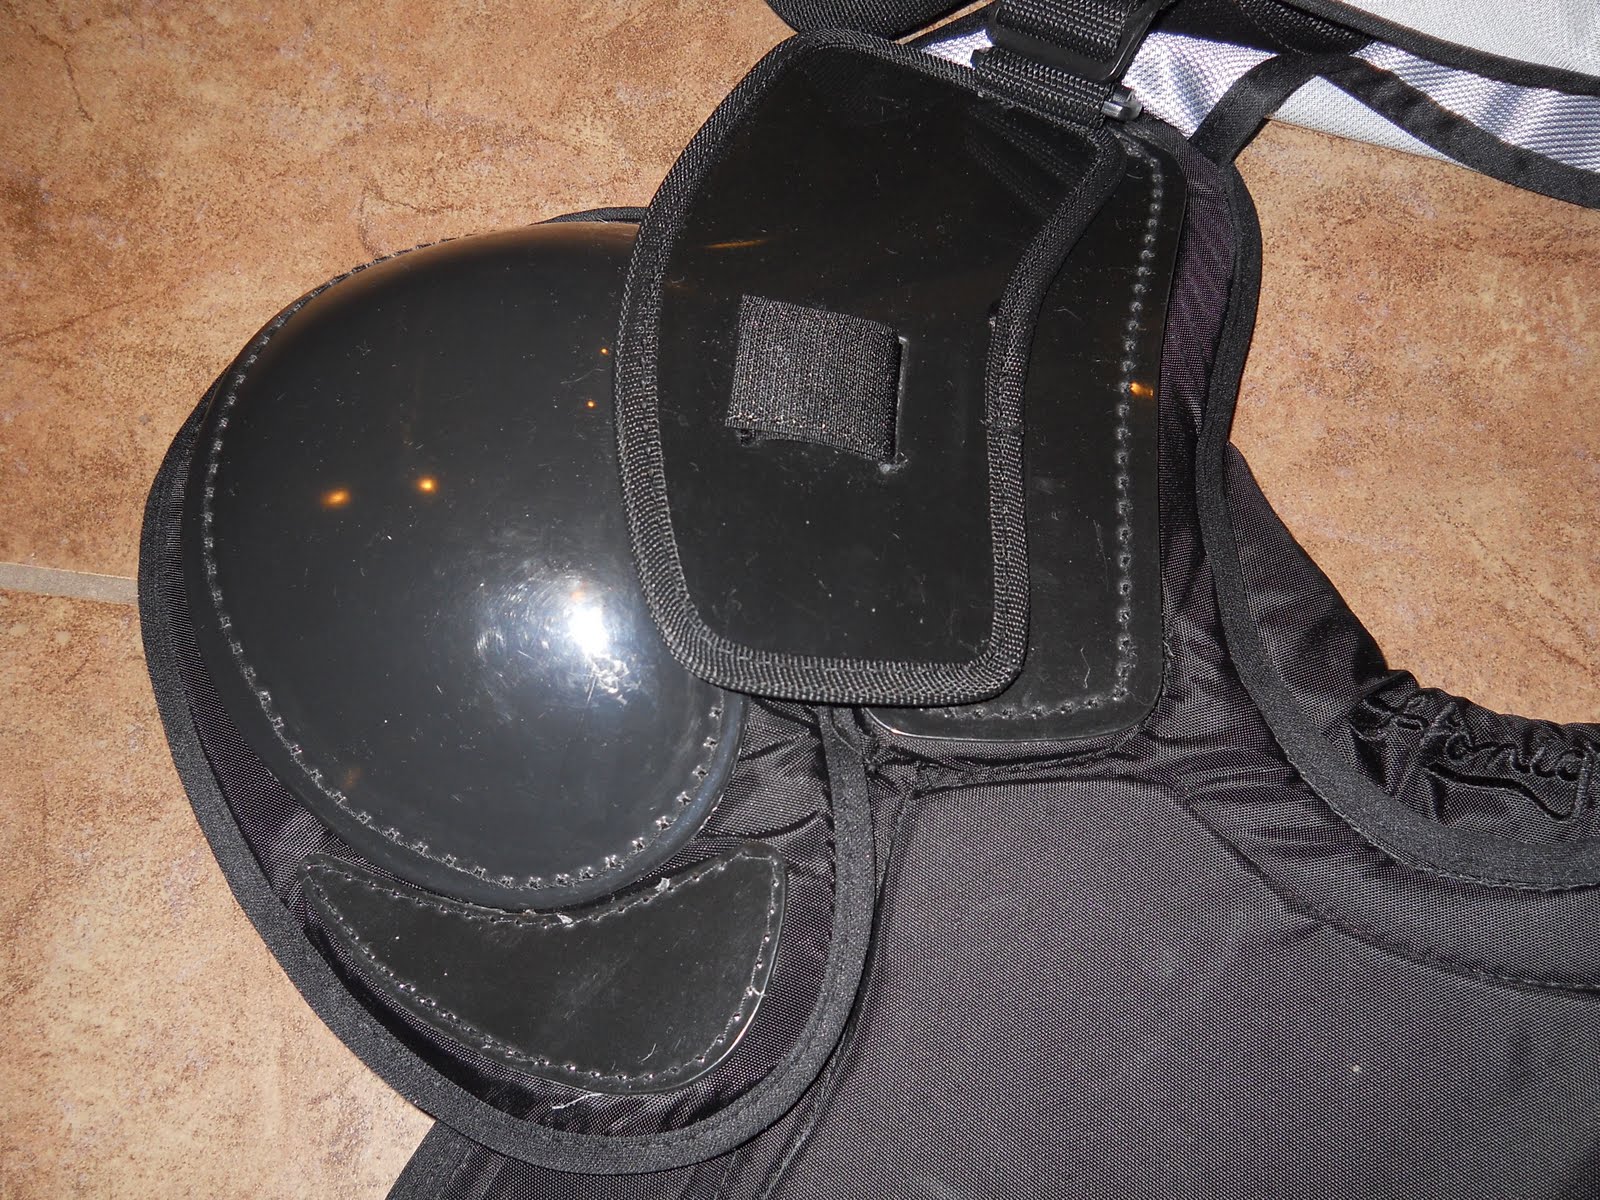 Midwest Ump: Review of Honig’s Pro Elite Chest Protector K1